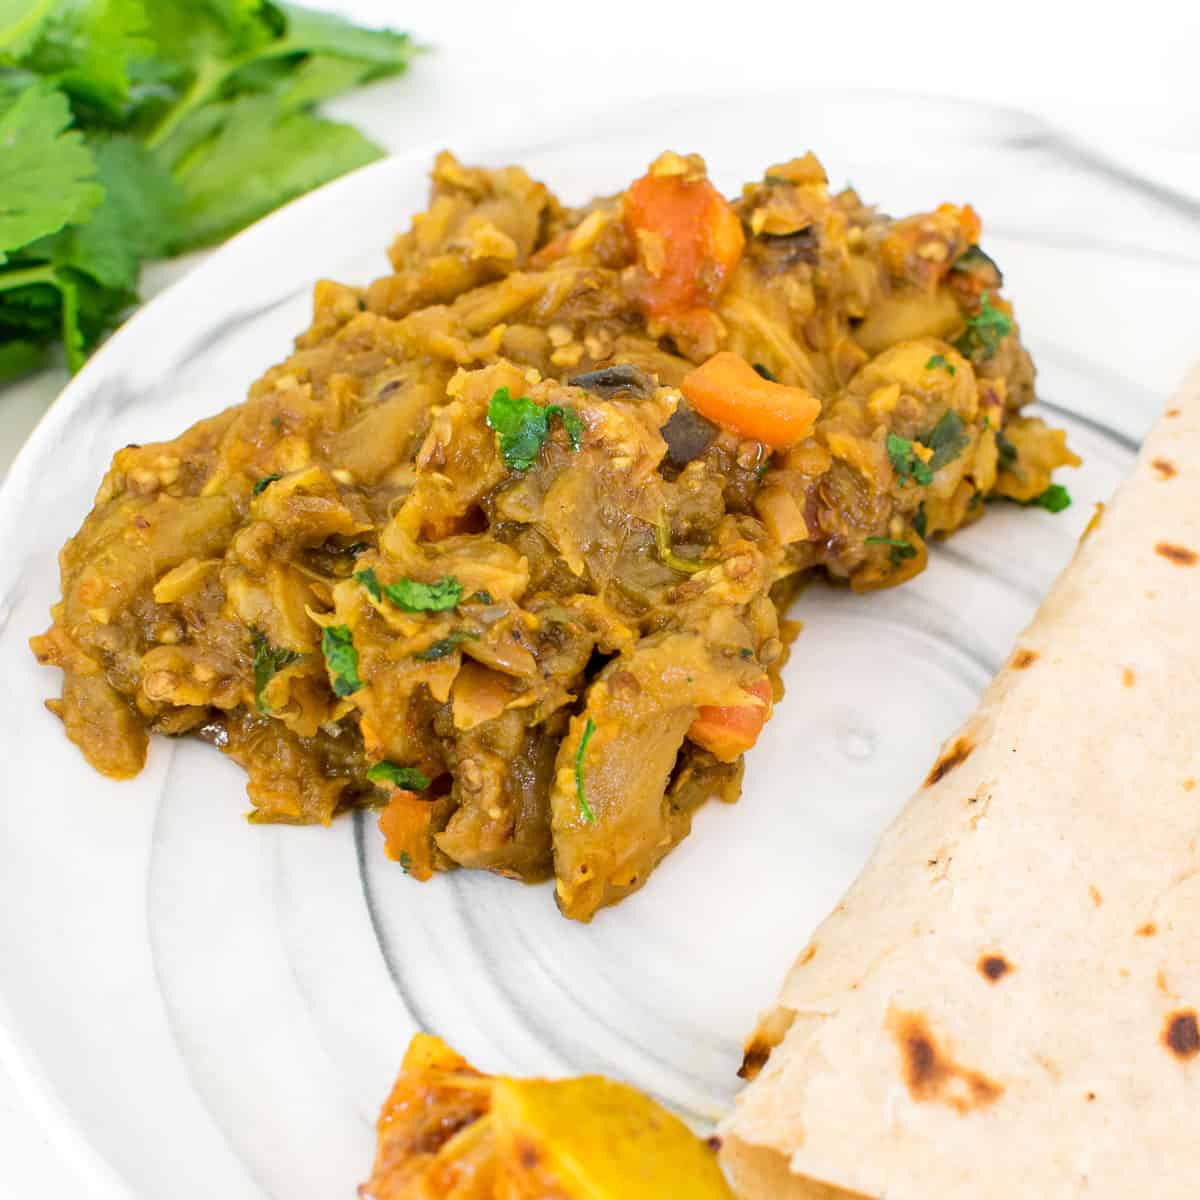 This Easy Baingan Bharta (Indian Mashed Eggplant) brings together the smoky goodness of roasted eggplant with a medley of aromatic spices, resulting in a creamy and satisfying mashed eggplant dish that is sure to tantalize your taste buds | kiipfit.com